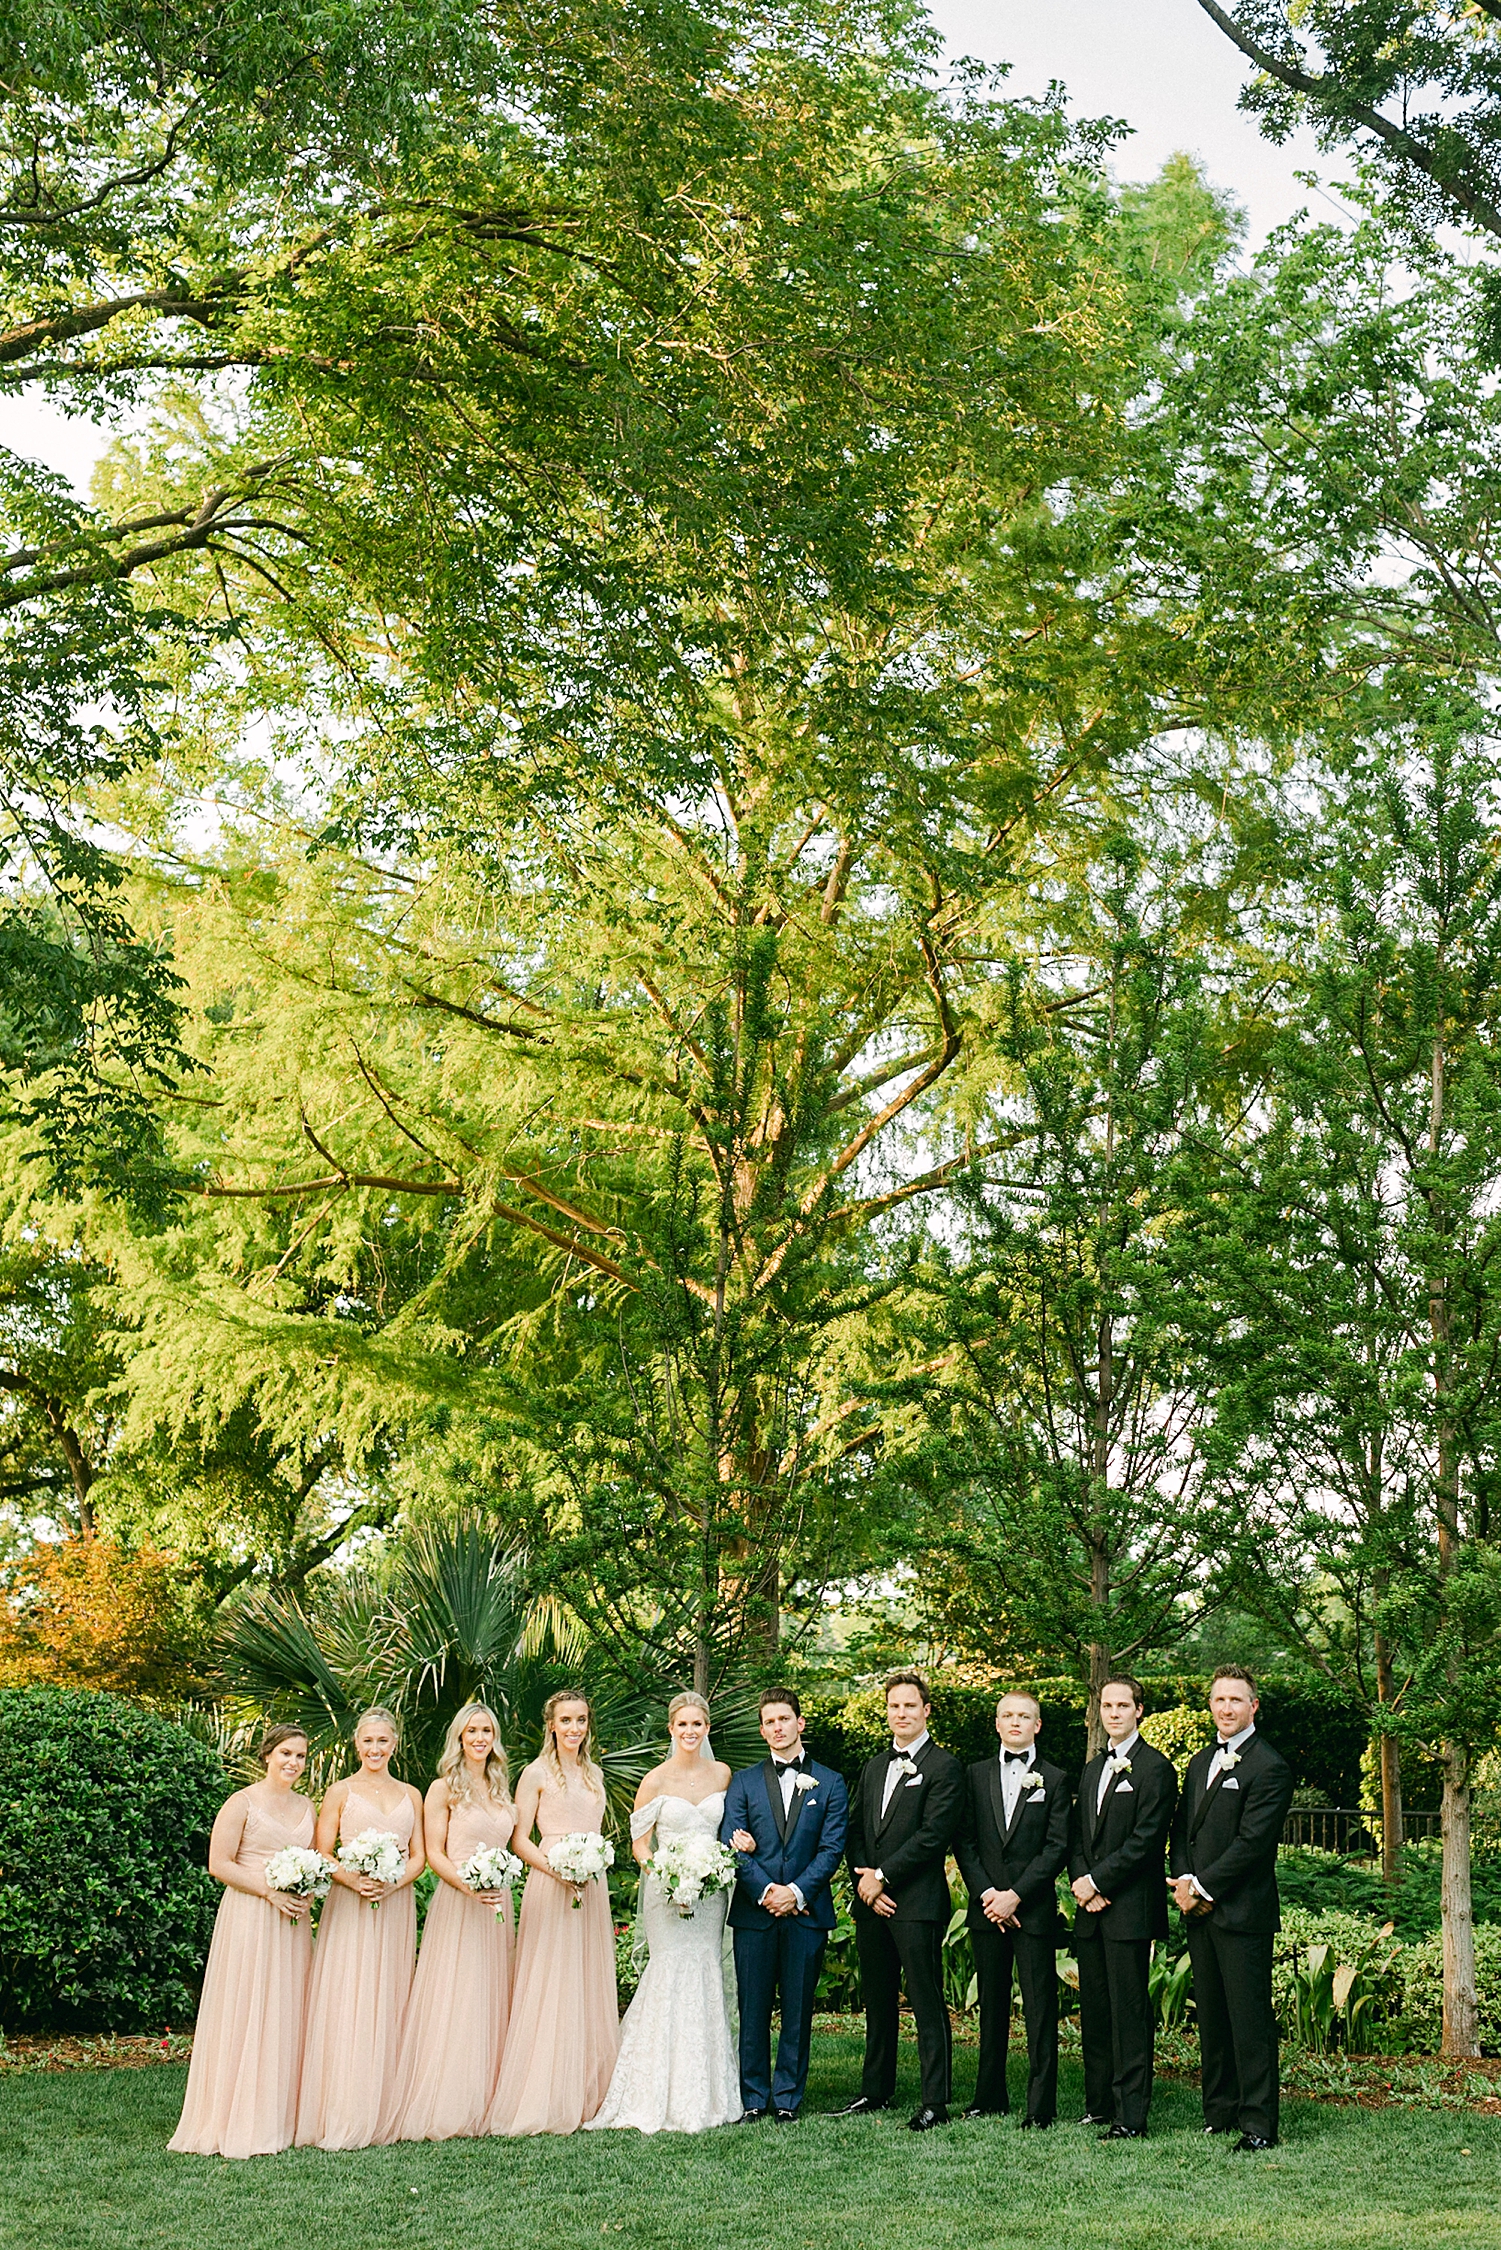 Bride in white wedding dress and veil and Groom in blue tuxedo posing with four bridesmaids in peach dresses and groomsmen in black tuxedos for in green garden